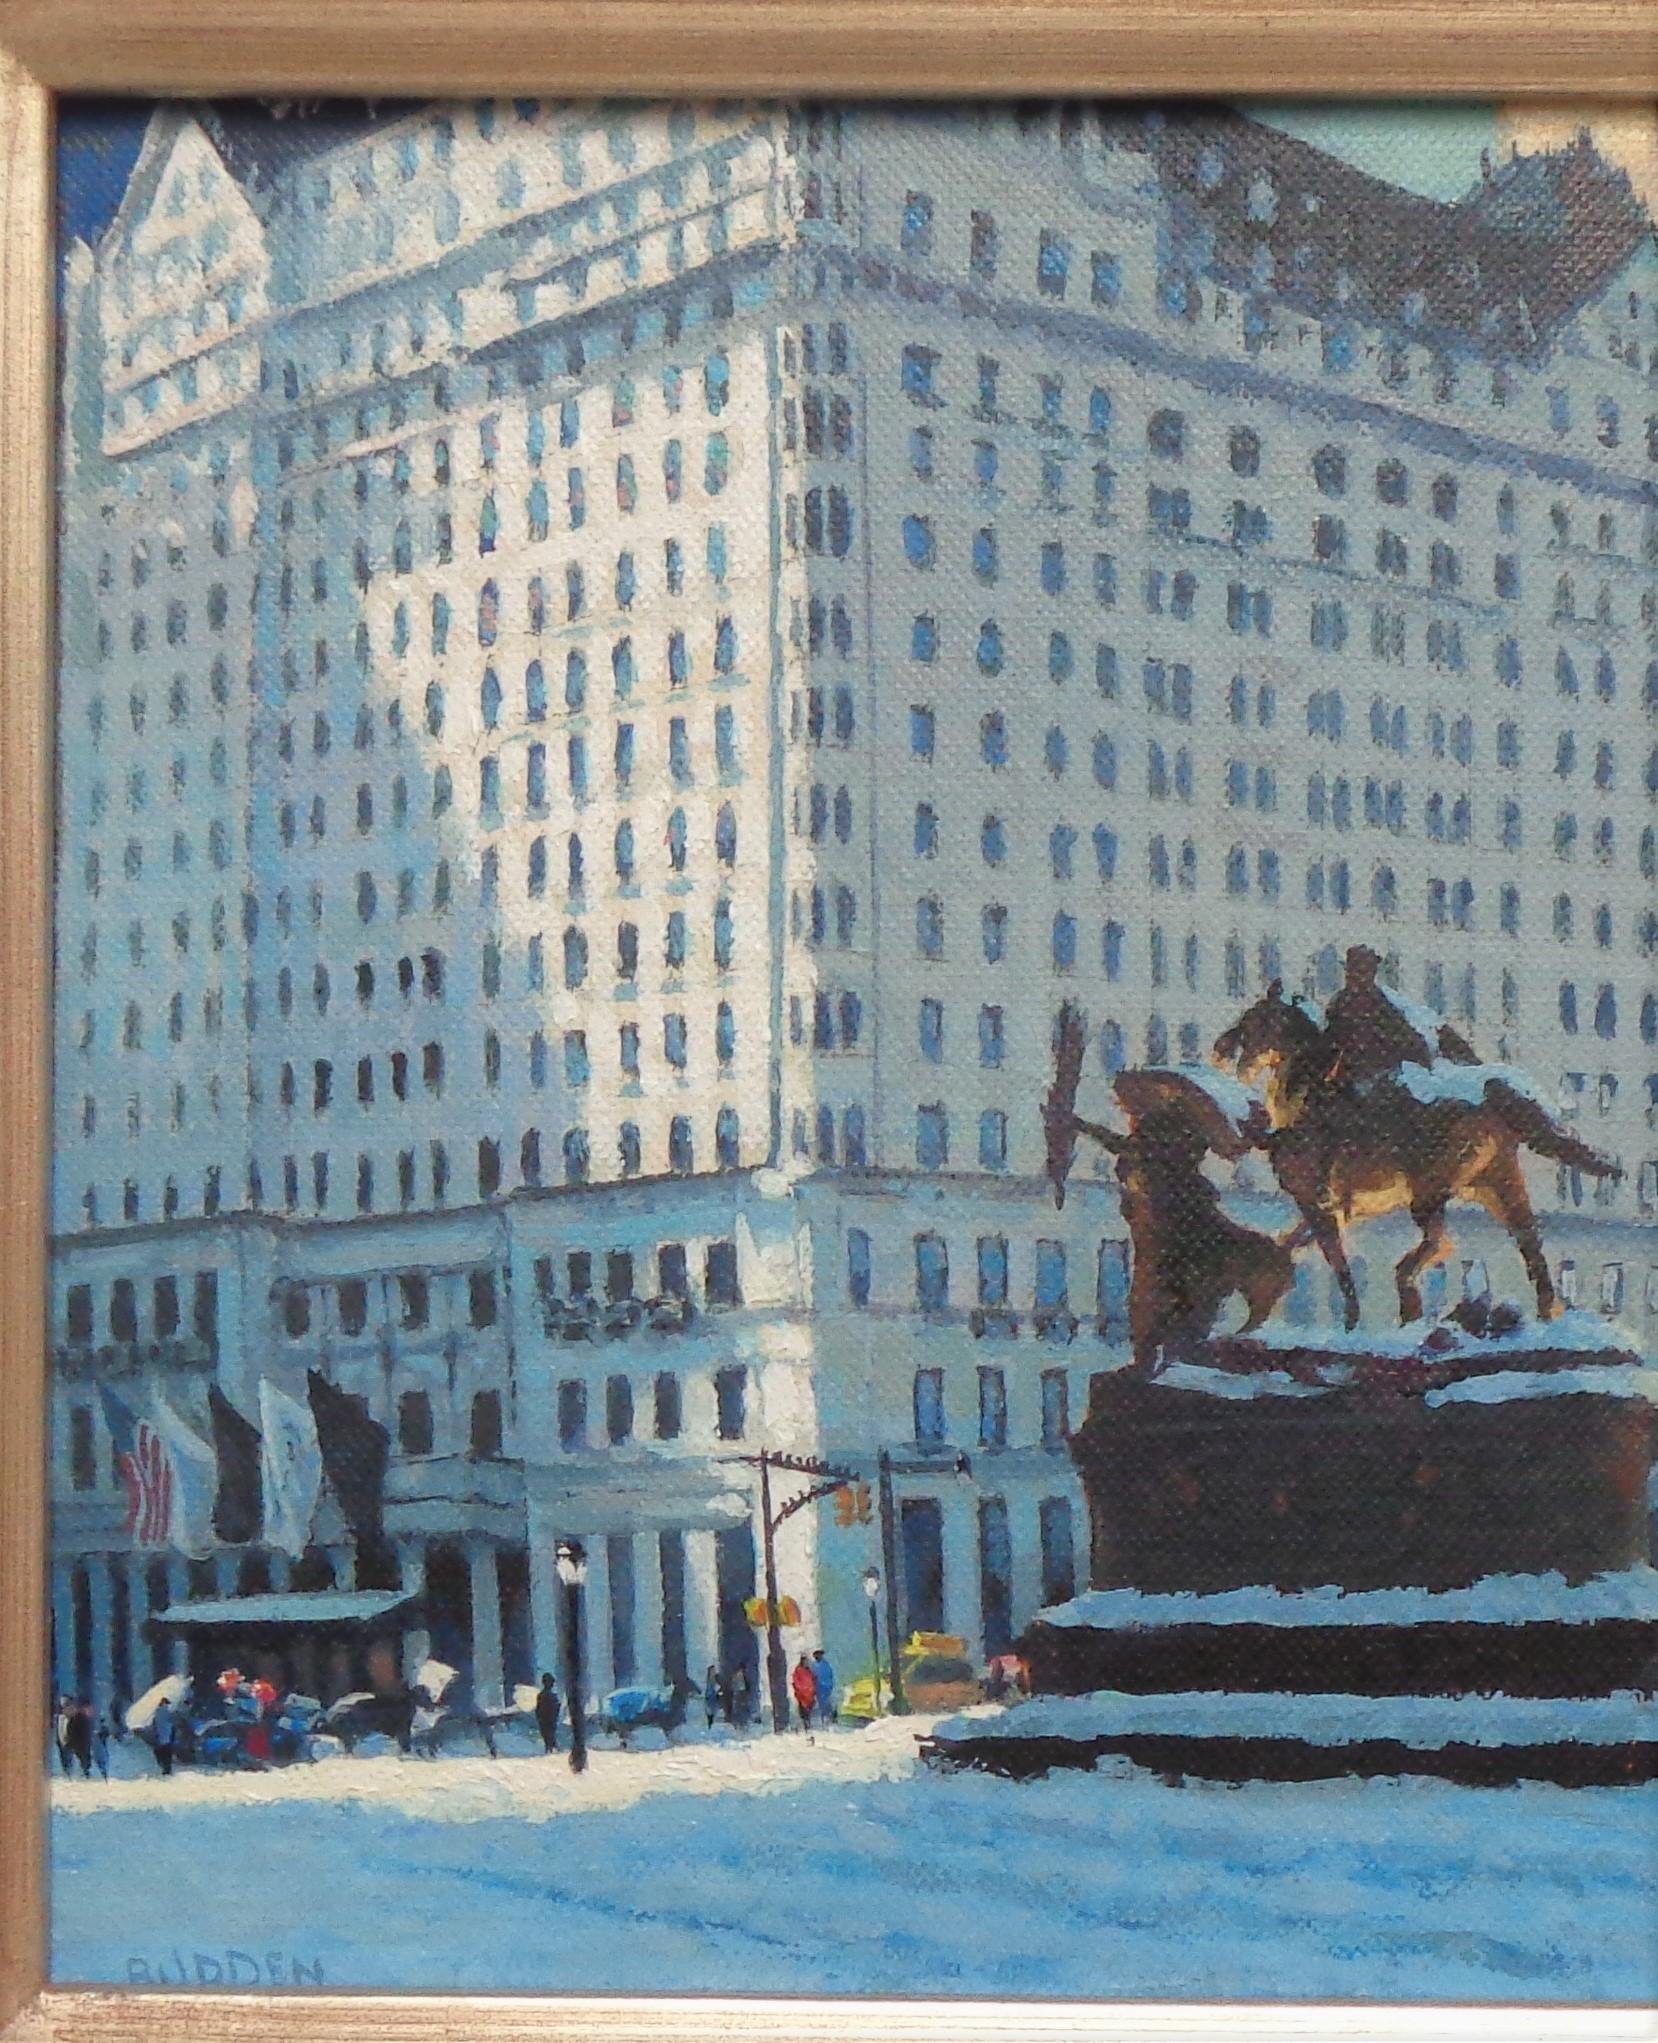  New York City Snow Painting Michael Budden Grand Army Plaza Central Park For Sale 2